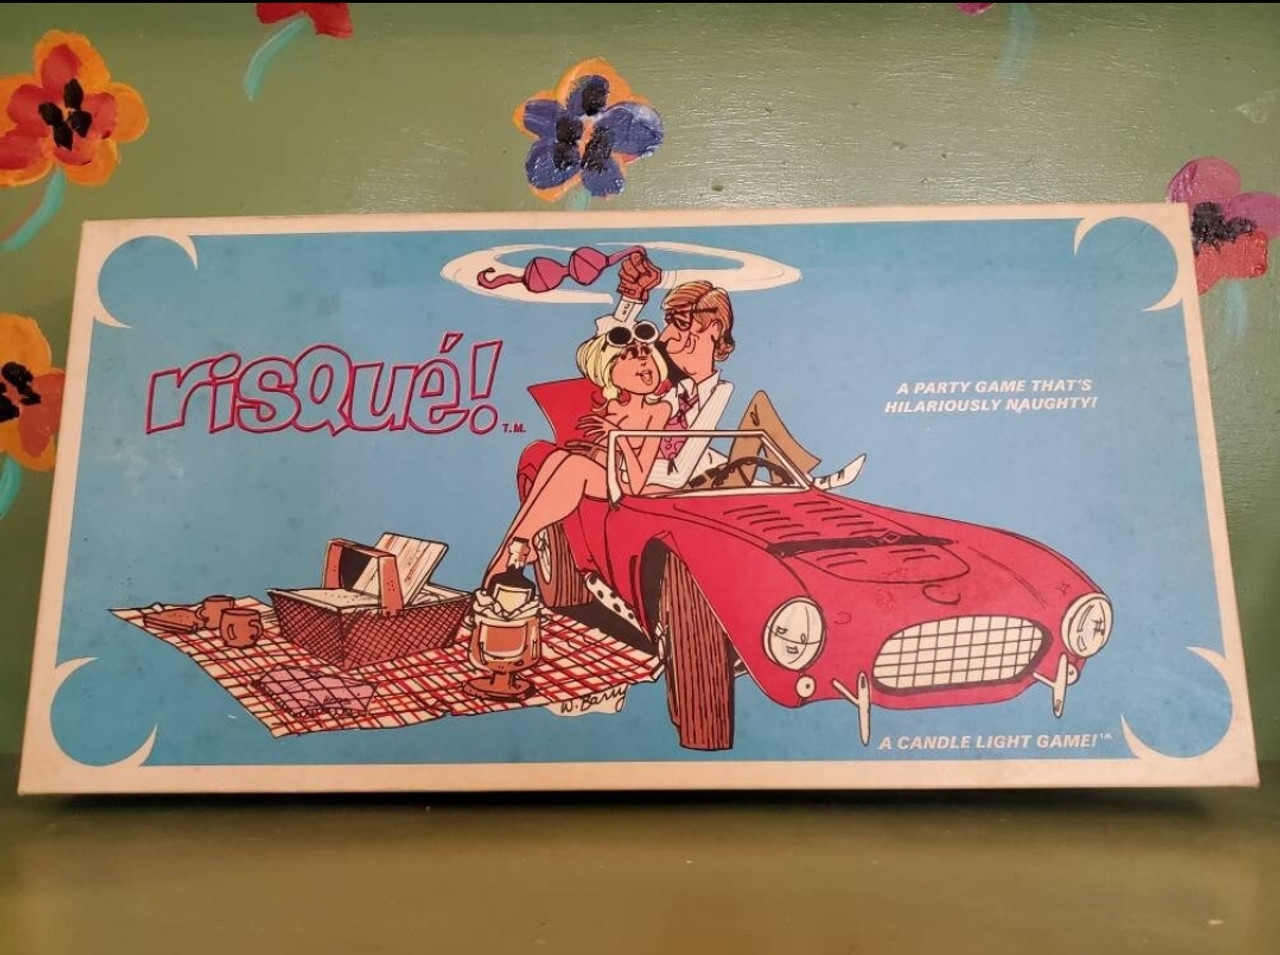 Vintage Risque Board Game Mid Century Moderation image